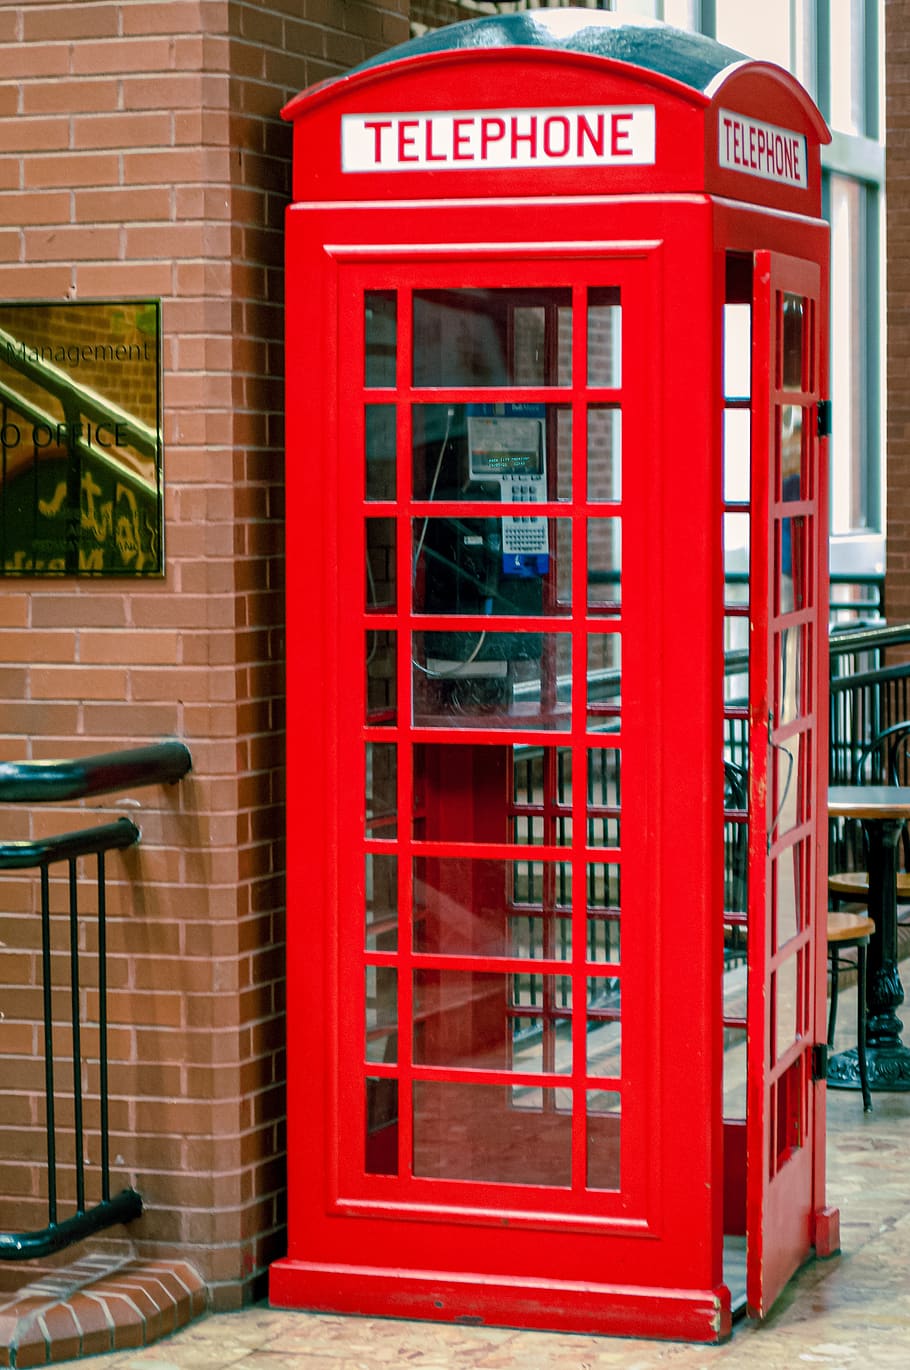 telephone booth, red, phone, communication, booth, public, telephone, building exterior, text, architecture